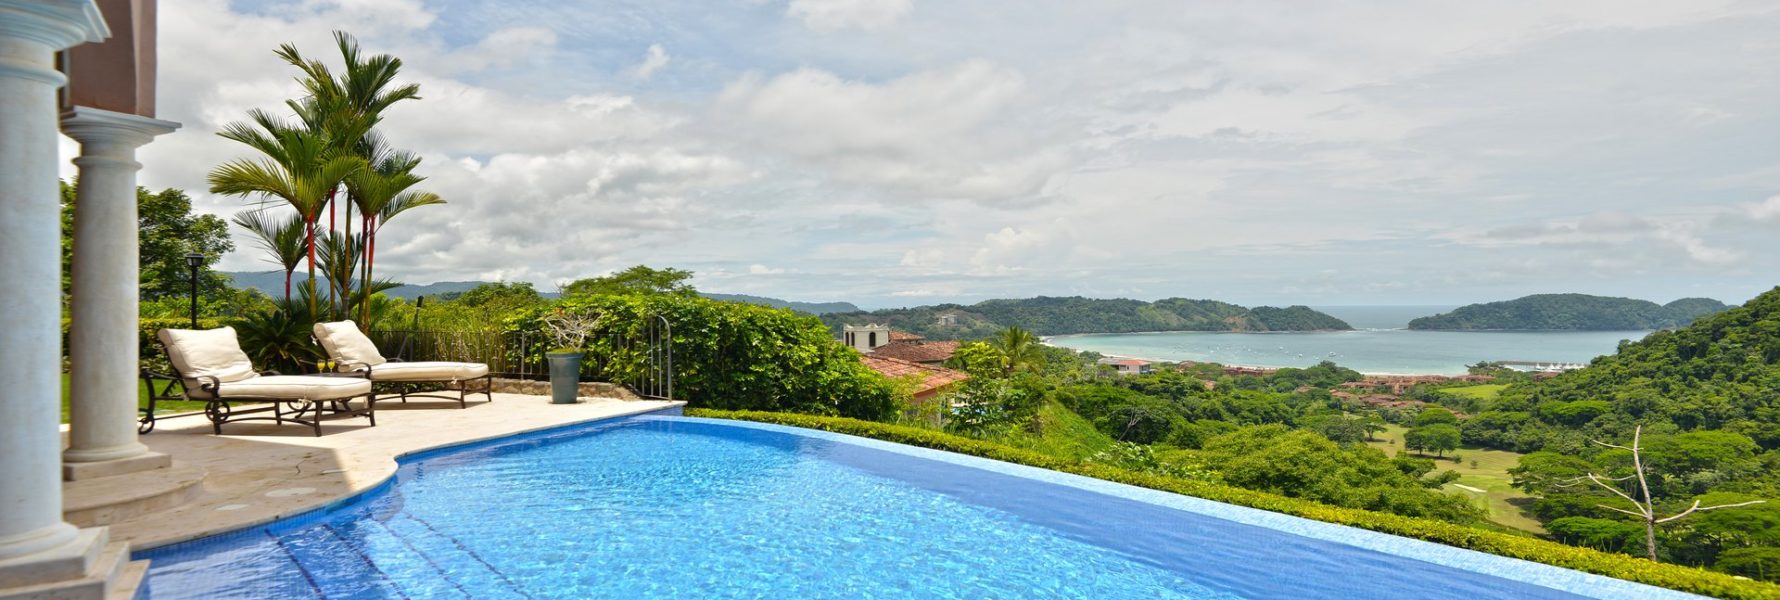 Imagine lounging by the pool, here the ocean and forest views add a touch of grandeur to this enchanting setting.